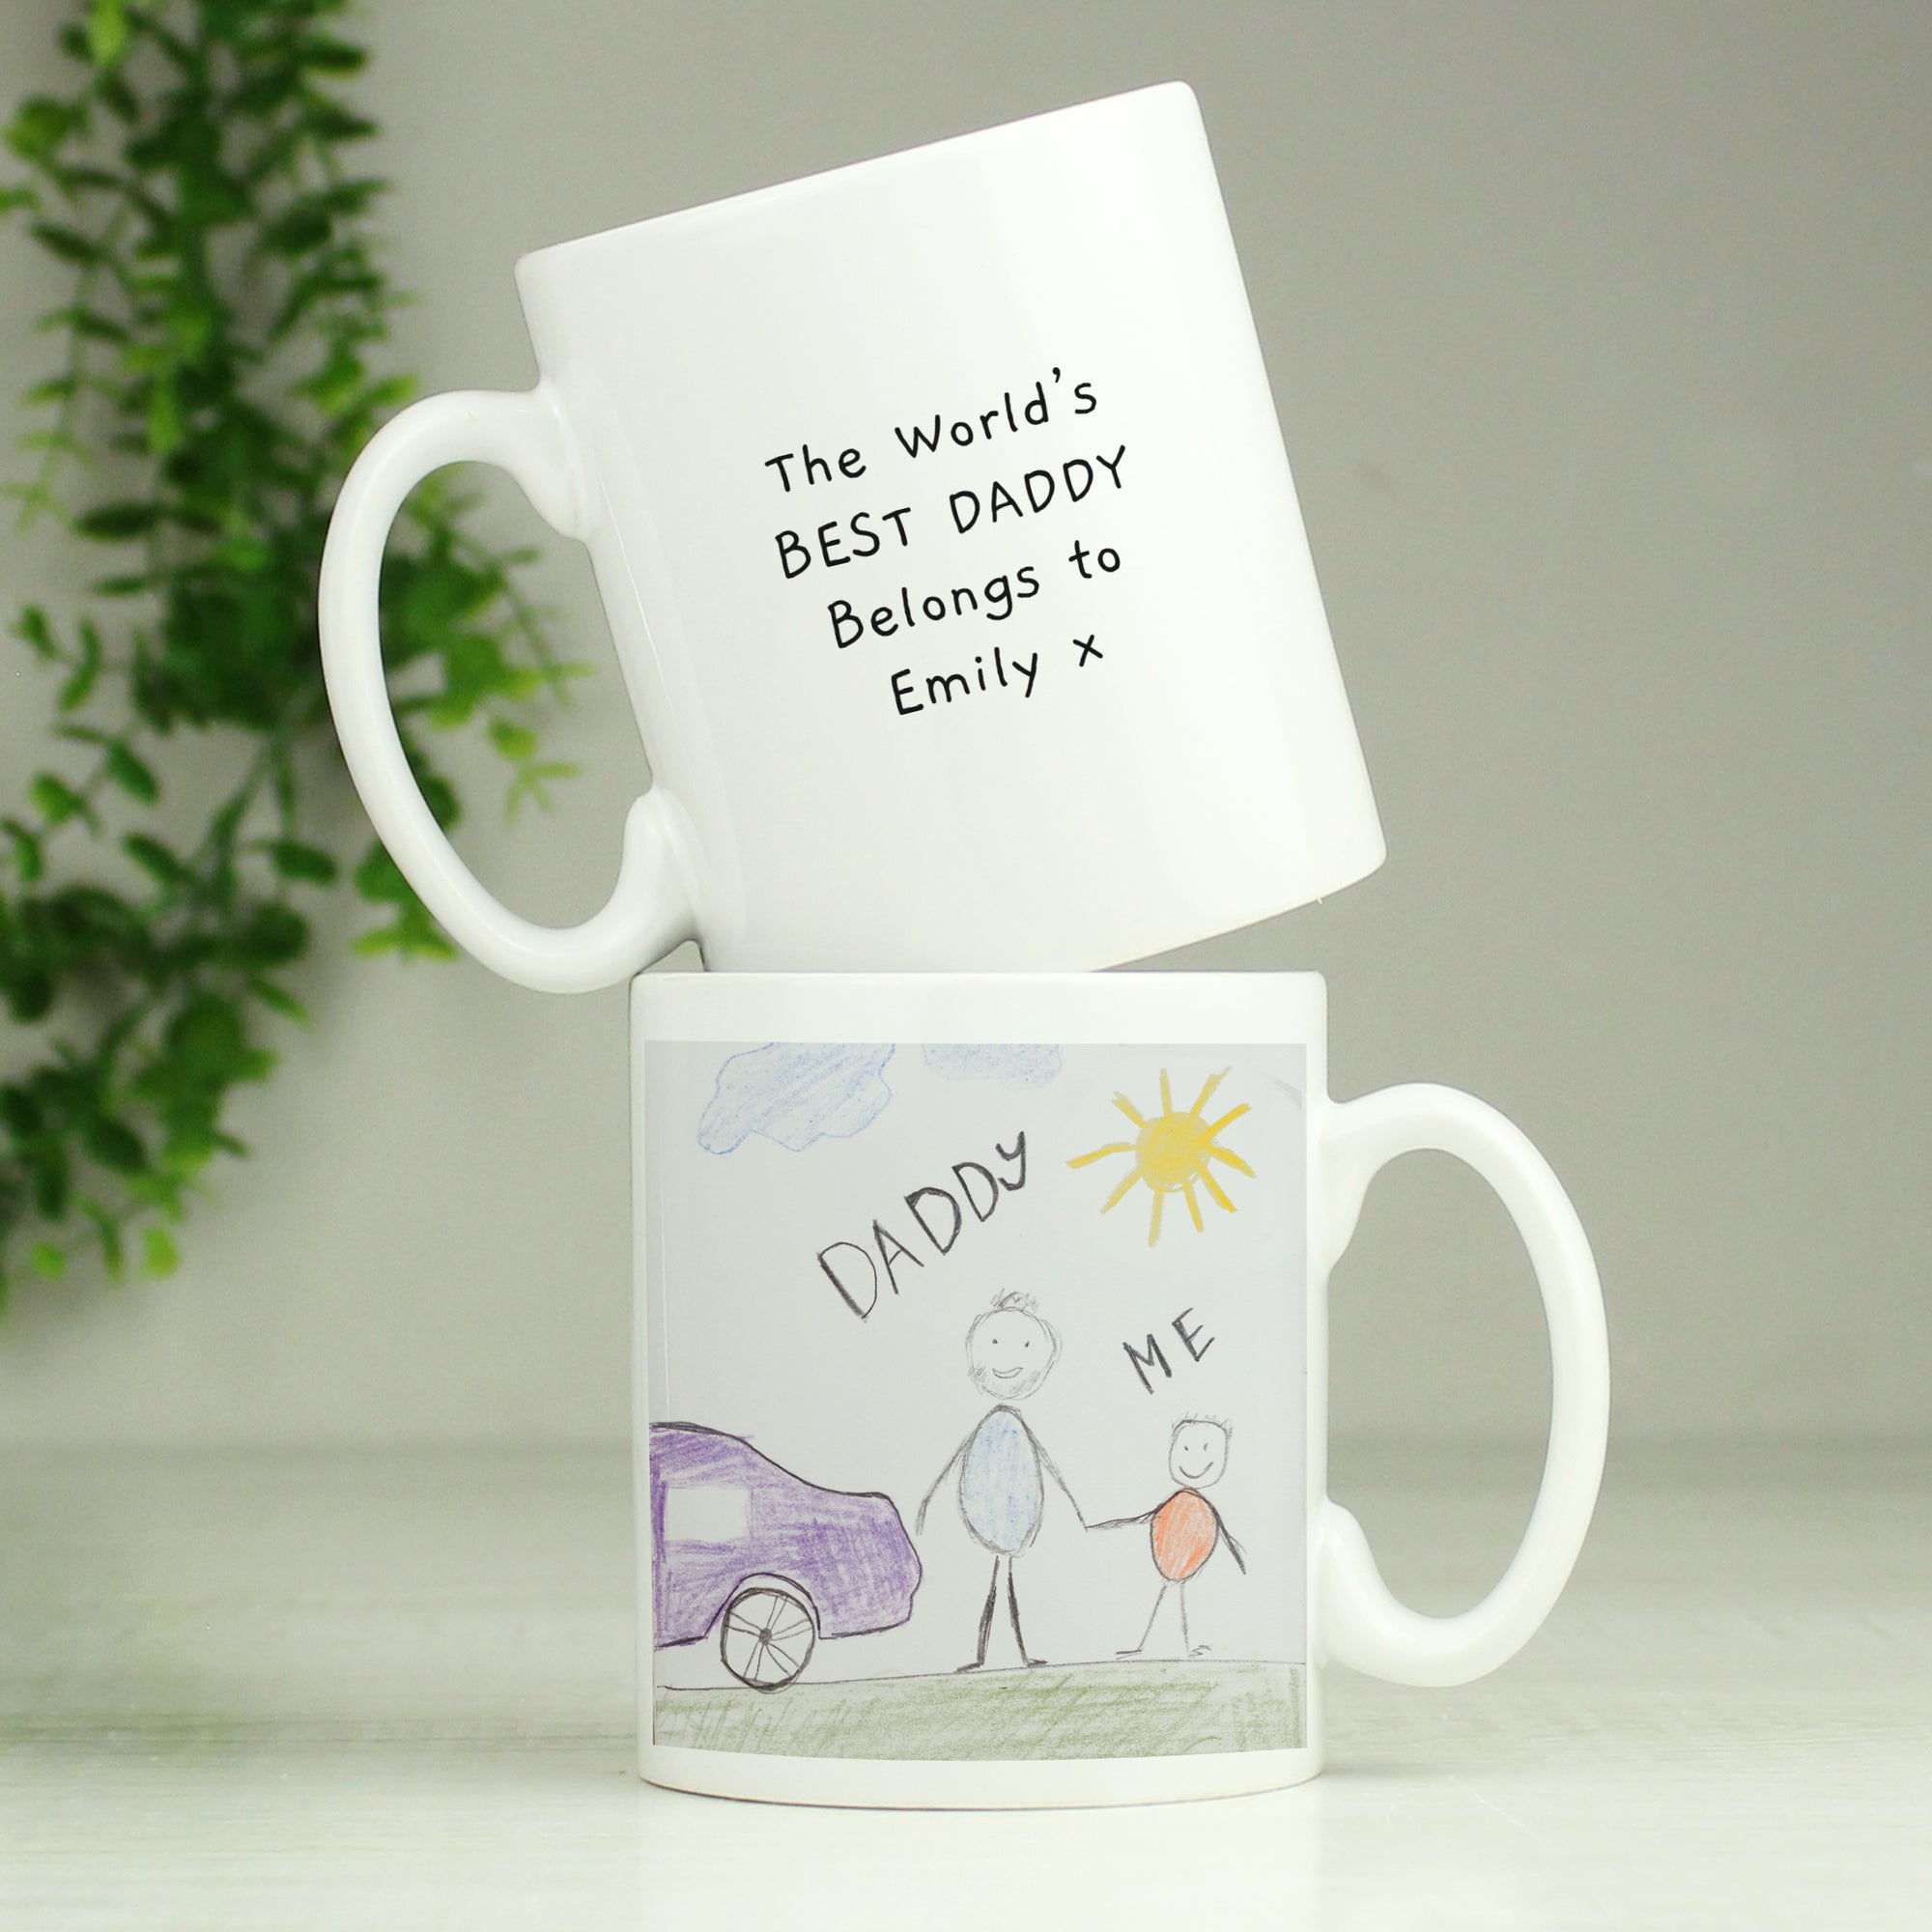 Image of a mug that can be printed with your child's own artwork on the front of the mug. You can choose to add your own message on the back of the mug or the image printed on the reverse as well as the front.